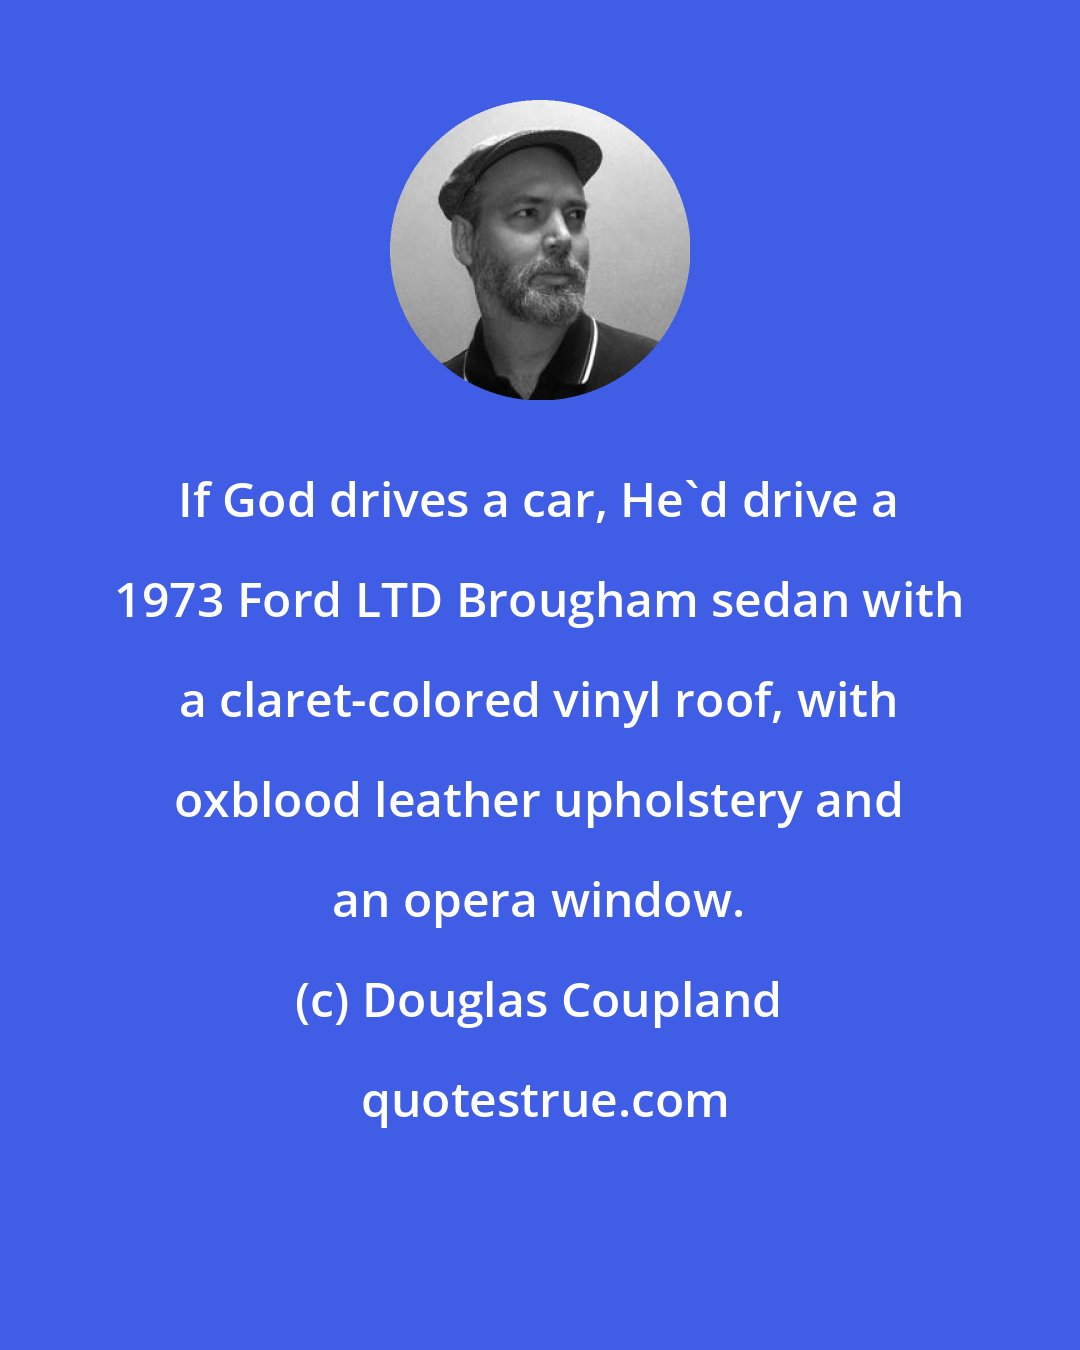 Douglas Coupland: If God drives a car, He'd drive a 1973 Ford LTD Brougham sedan with a claret-colored vinyl roof, with oxblood leather upholstery and an opera window.